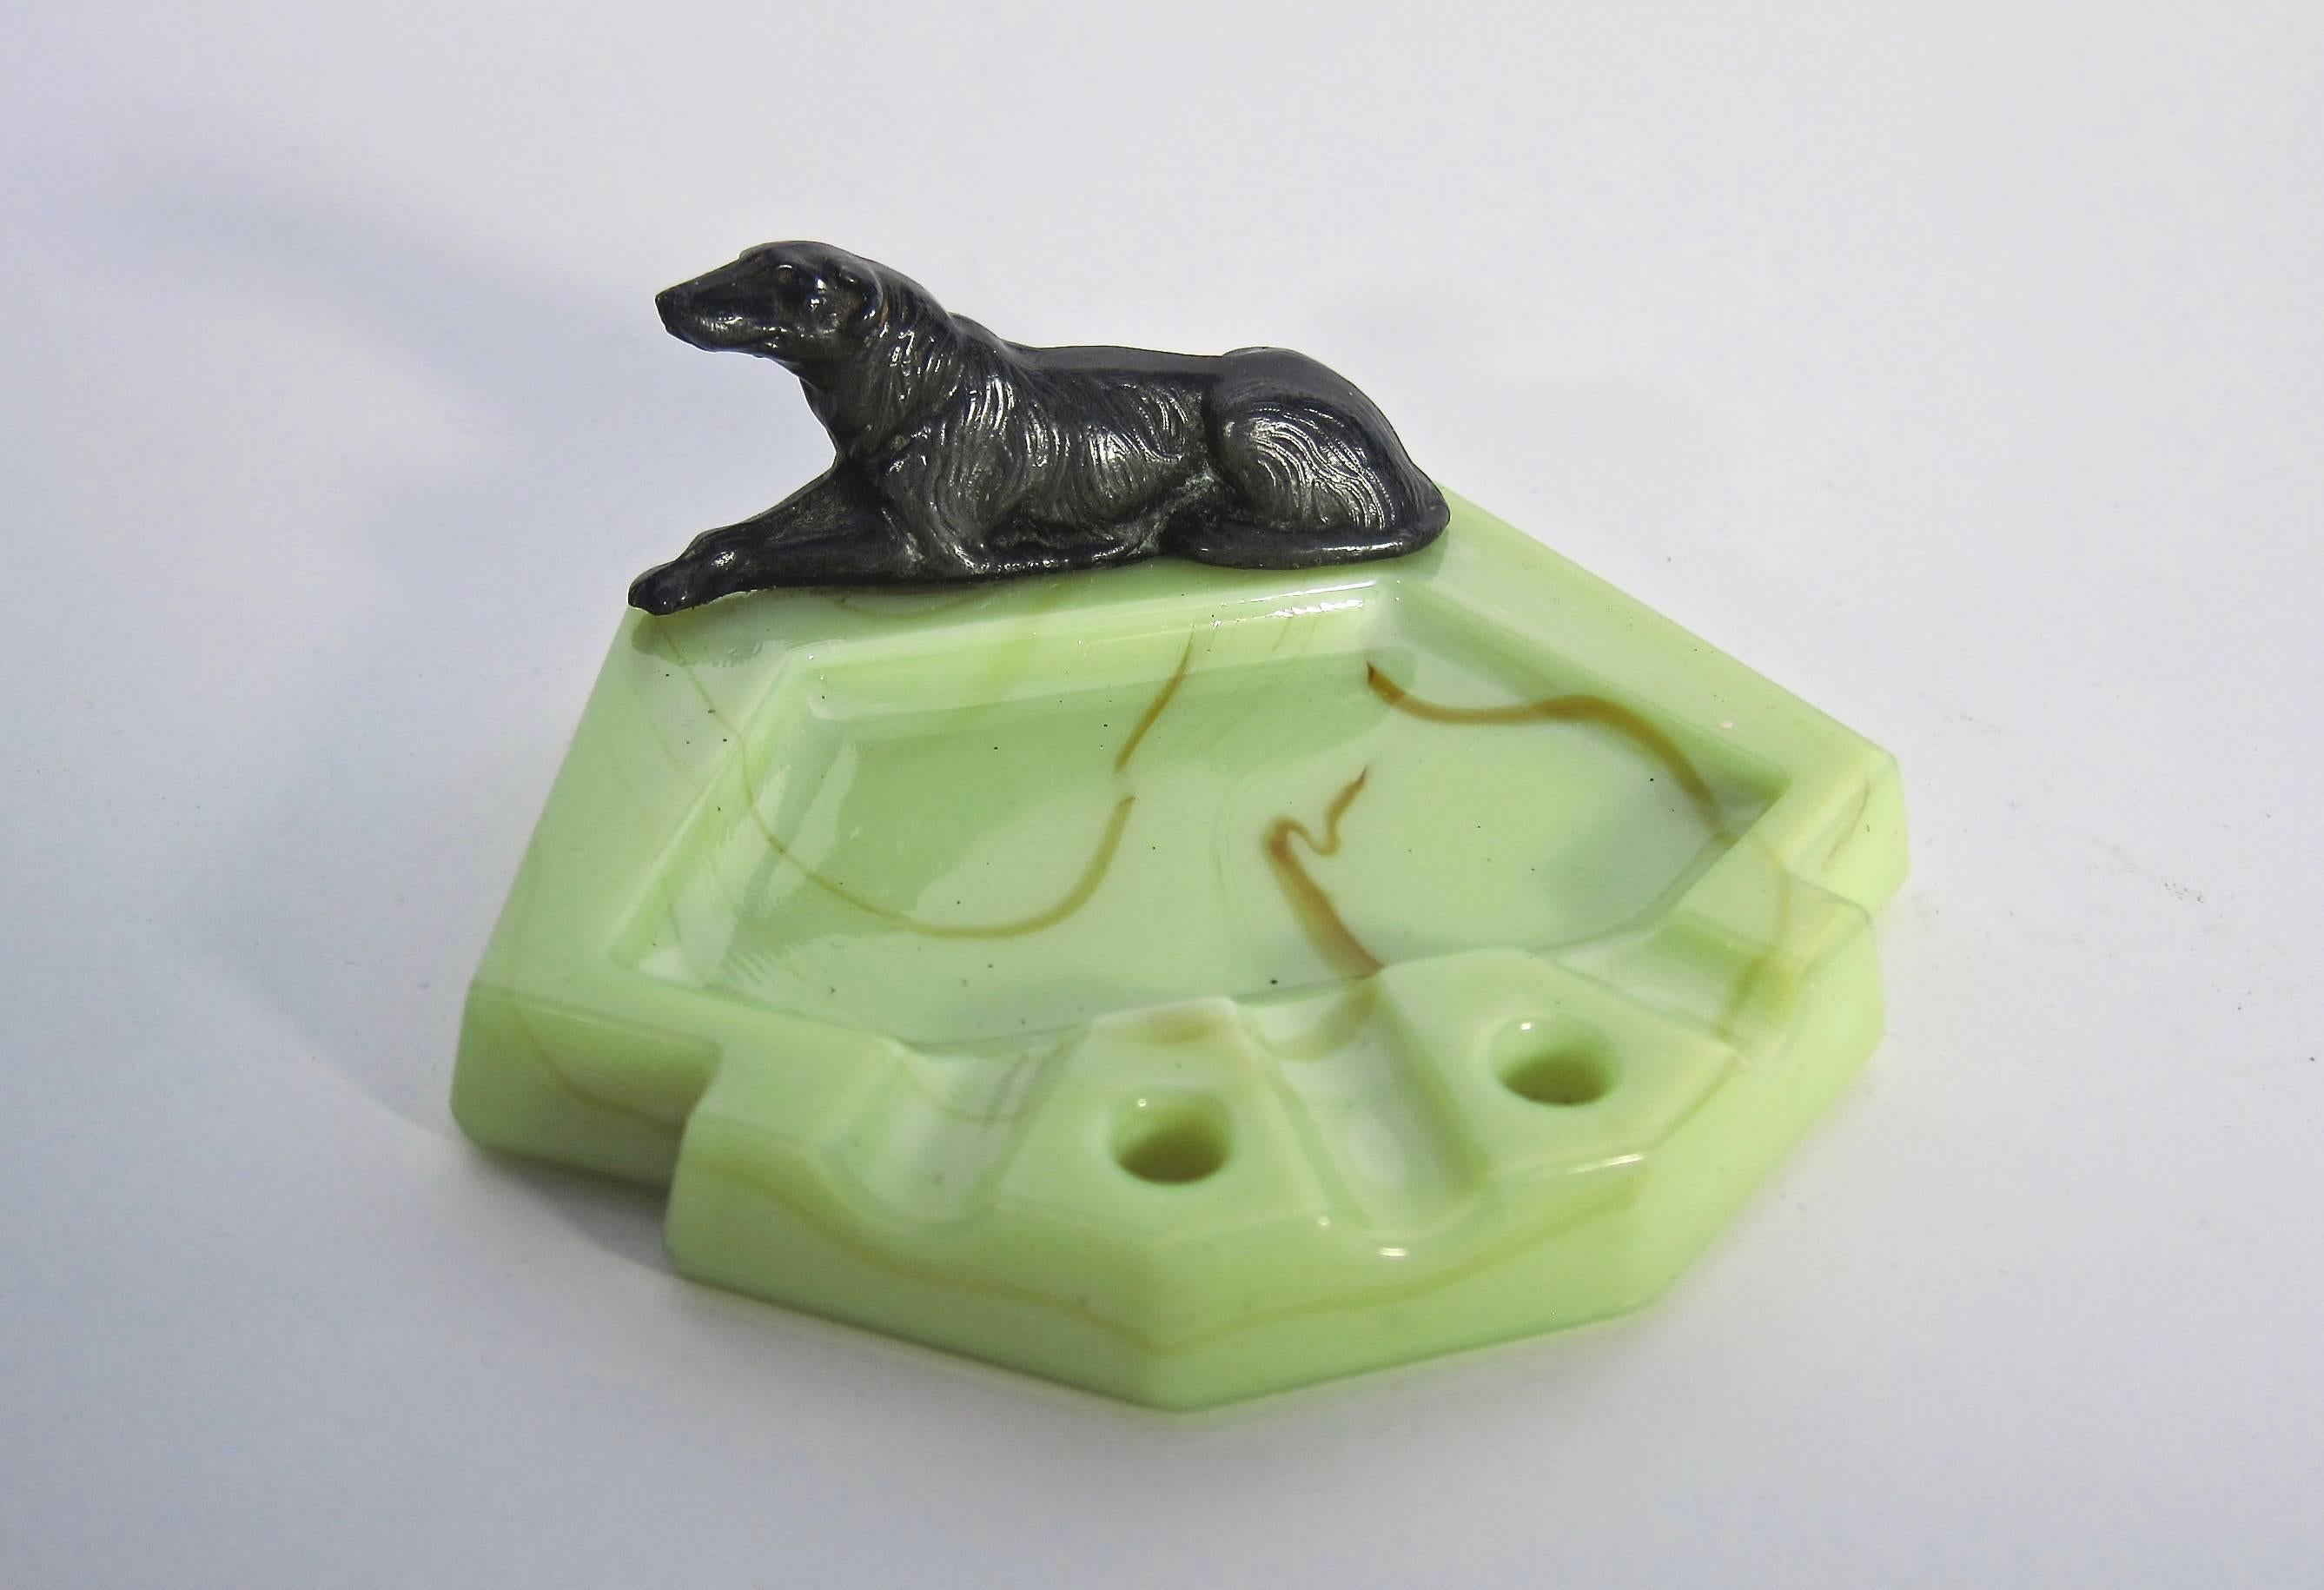 A stylish catchall dish from the Art Deco period, designed in green slag glass with butterscotch swirl accents and an elegant Borzoi/Russian Wolfhound in patinated cast silver metal mounted at edge. Originally an ashtray, the dish is a perfect